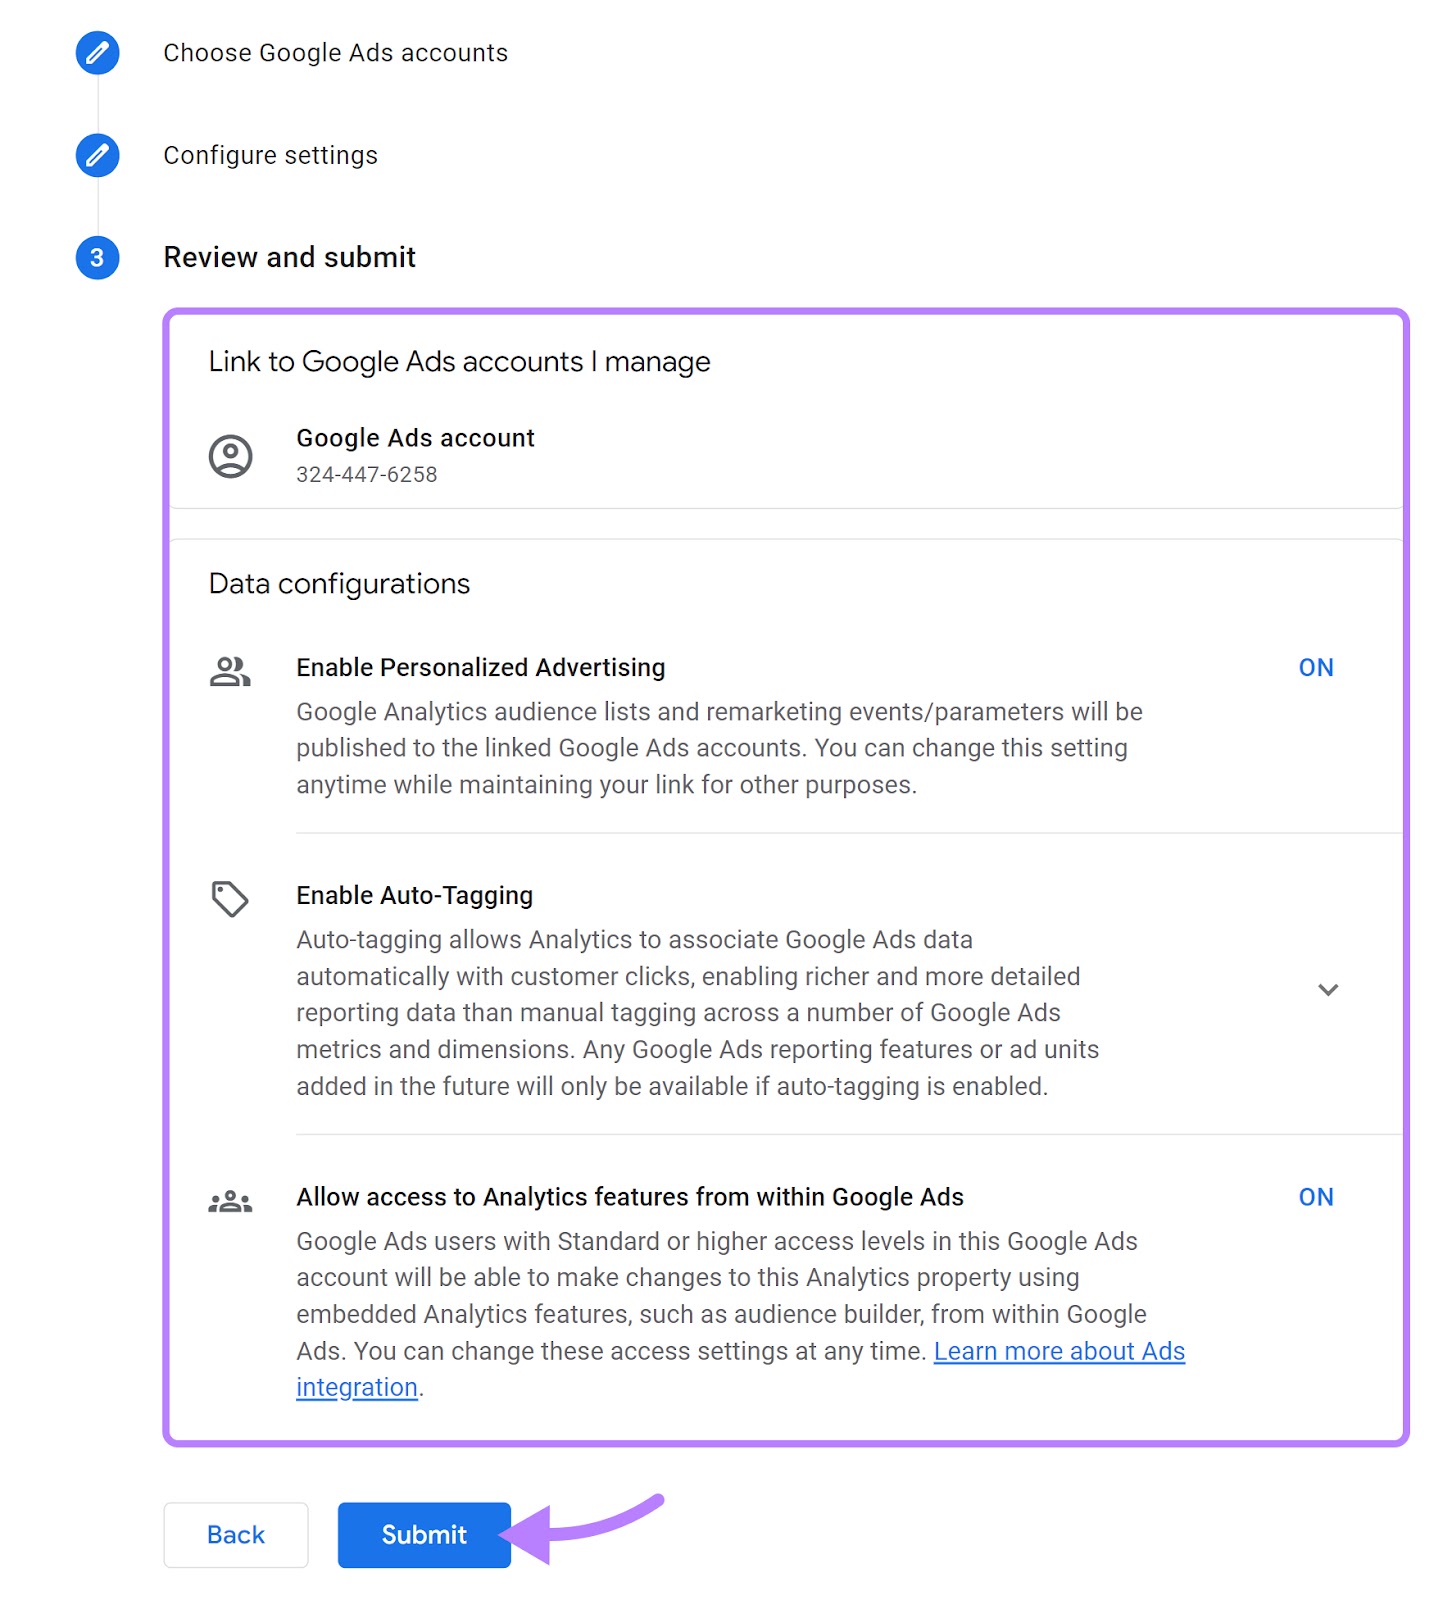 Configure the settings to link to Google Ads accounts